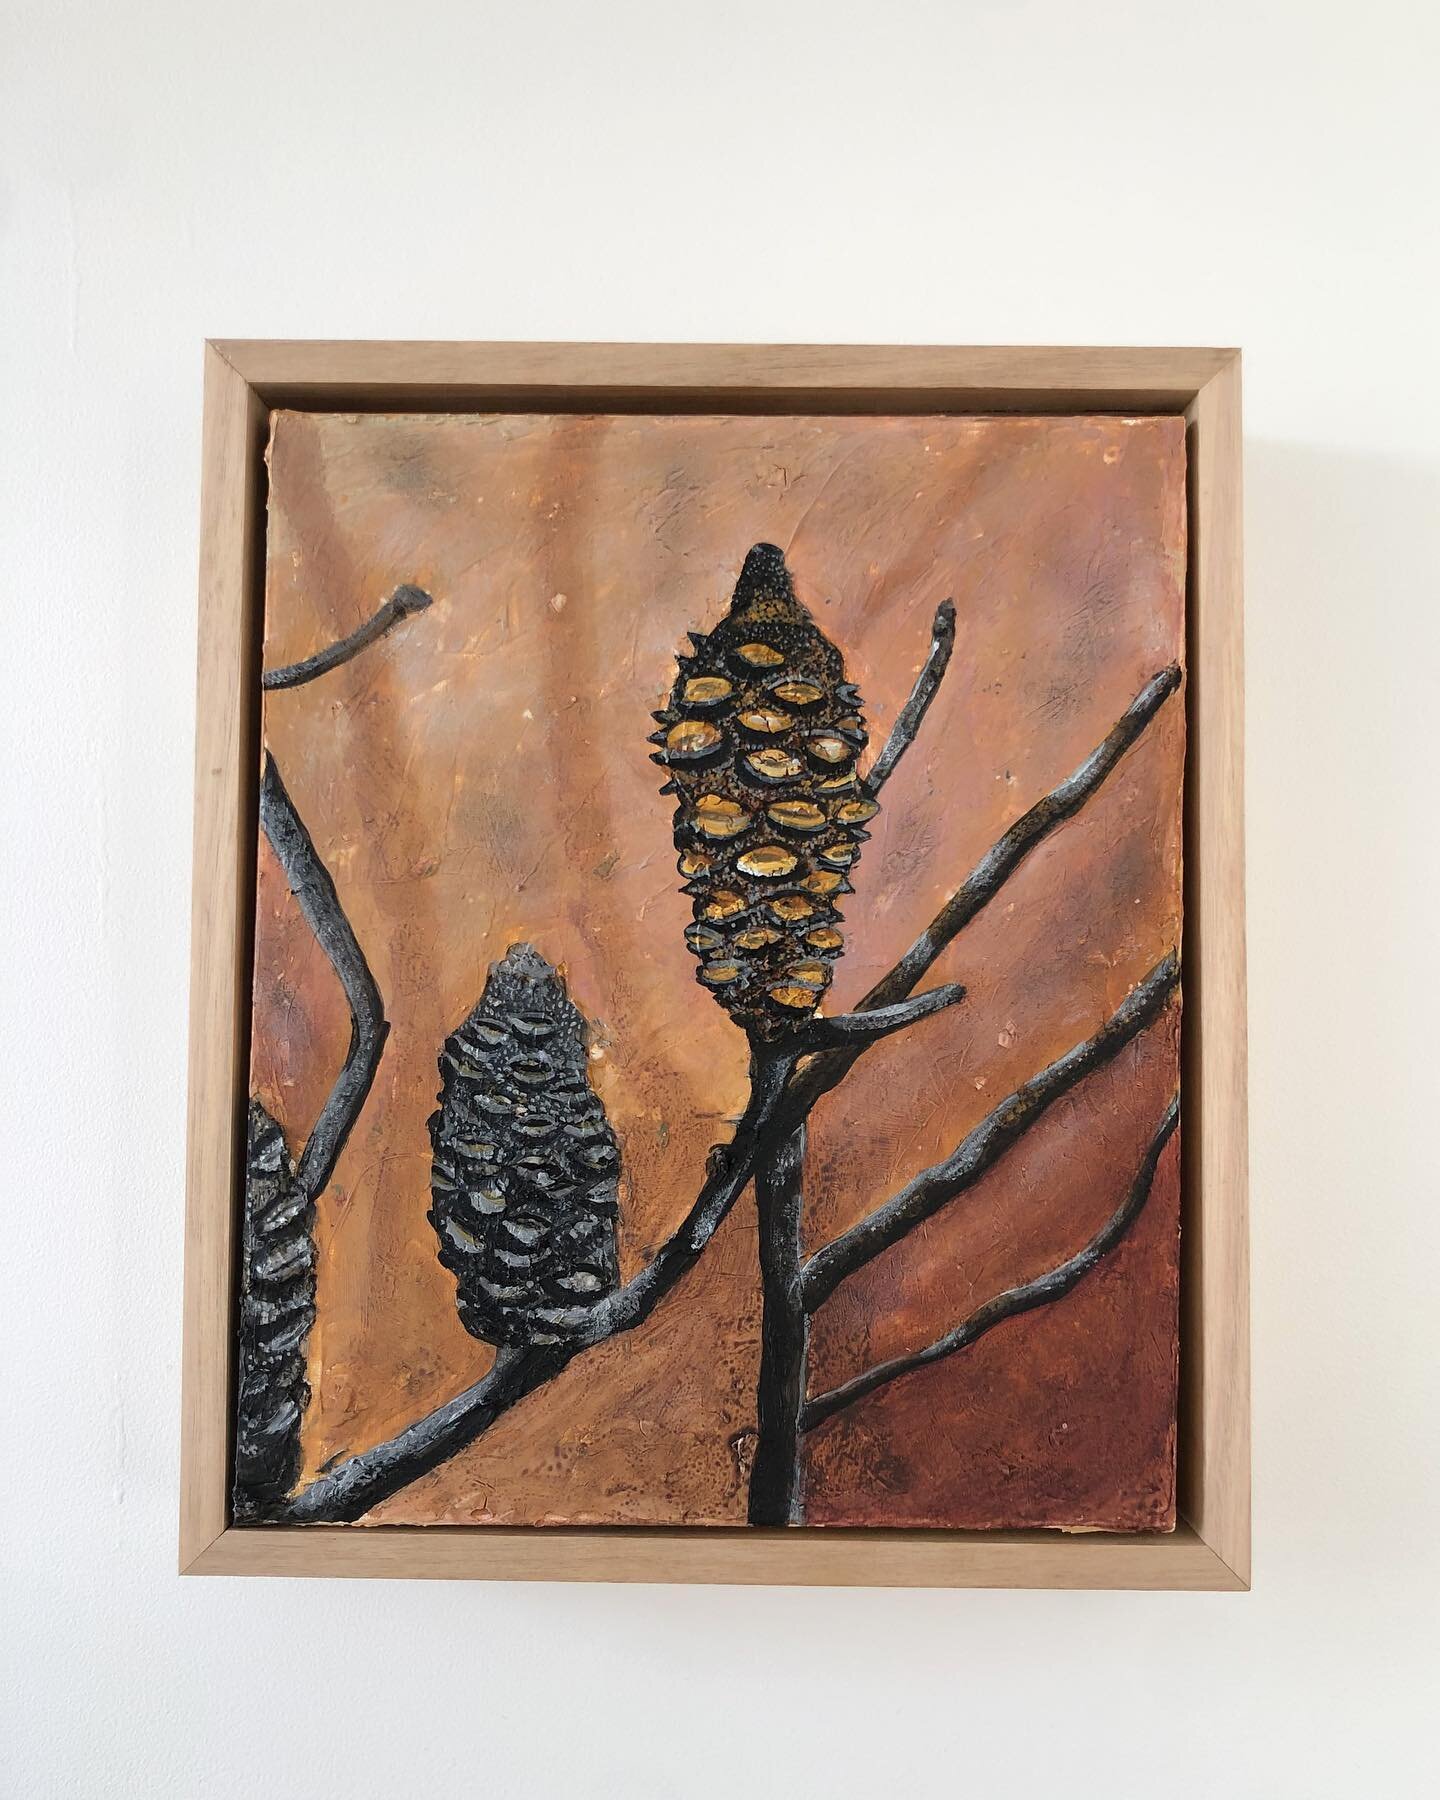 Burn and Bloom
.
Acrylic on canvas beautifully framed in Tasmanian oak
34 x 29cm
.
A flora study in a bit of a different colour palette from my usual work. Looking at the process of seed germination after fire.
.
This piece was a part of a series of 